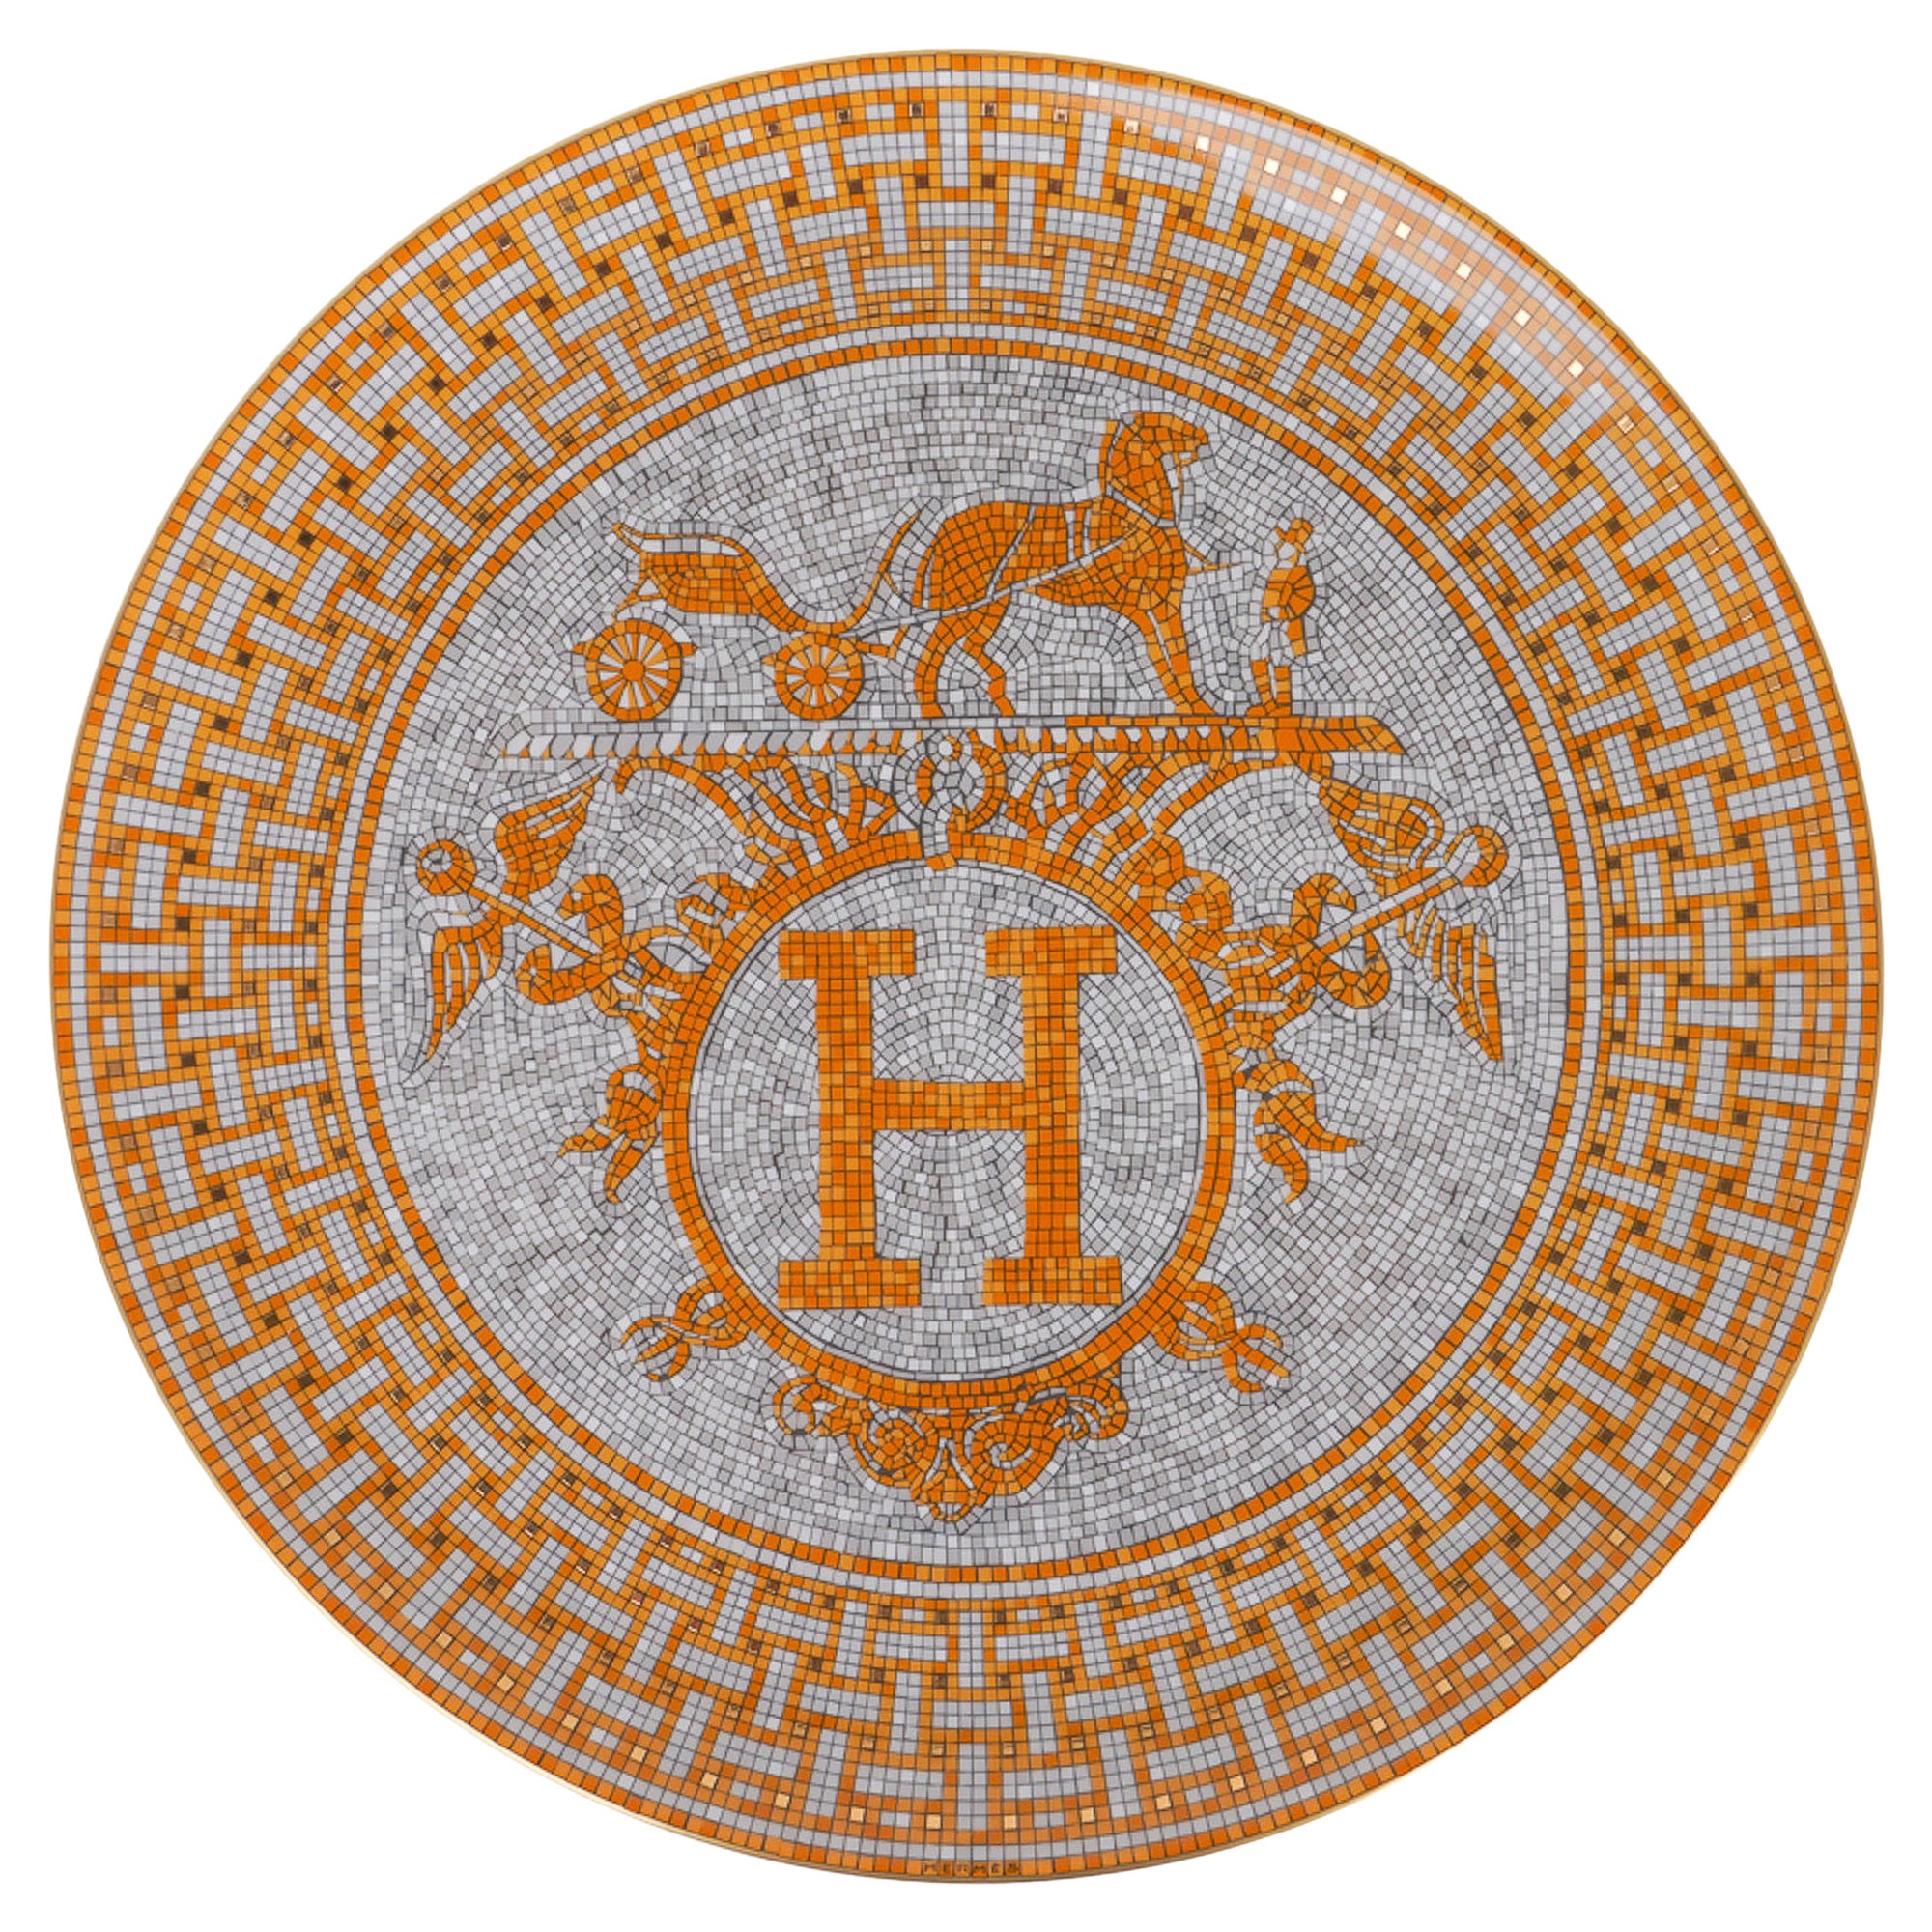 Hermes Mosaique - 14 For Sale on 1stDibs | hermes mosaic plates 